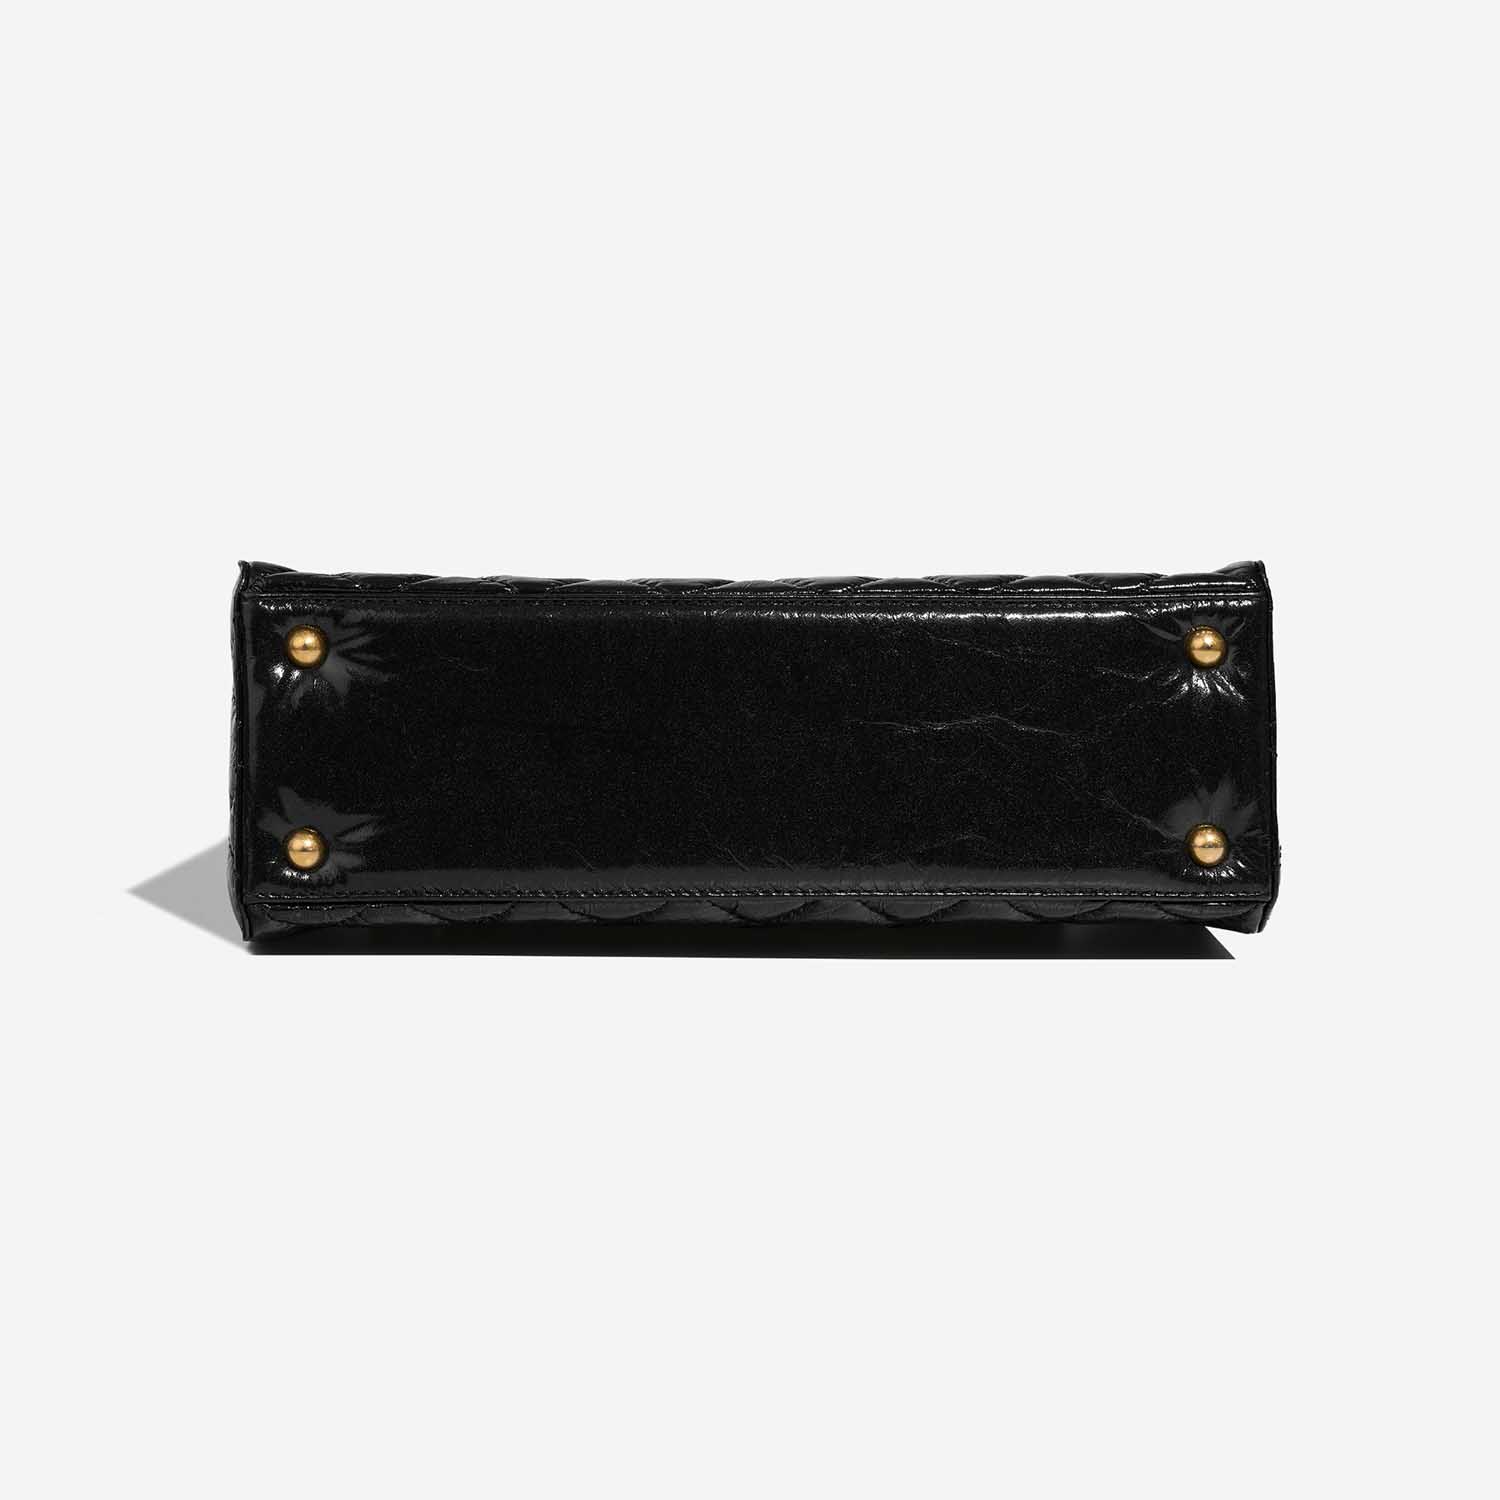 Pre-owned Chanel bag 2.55 Reissue Handle Patent Black Black | Sell your designer bag on Saclab.com